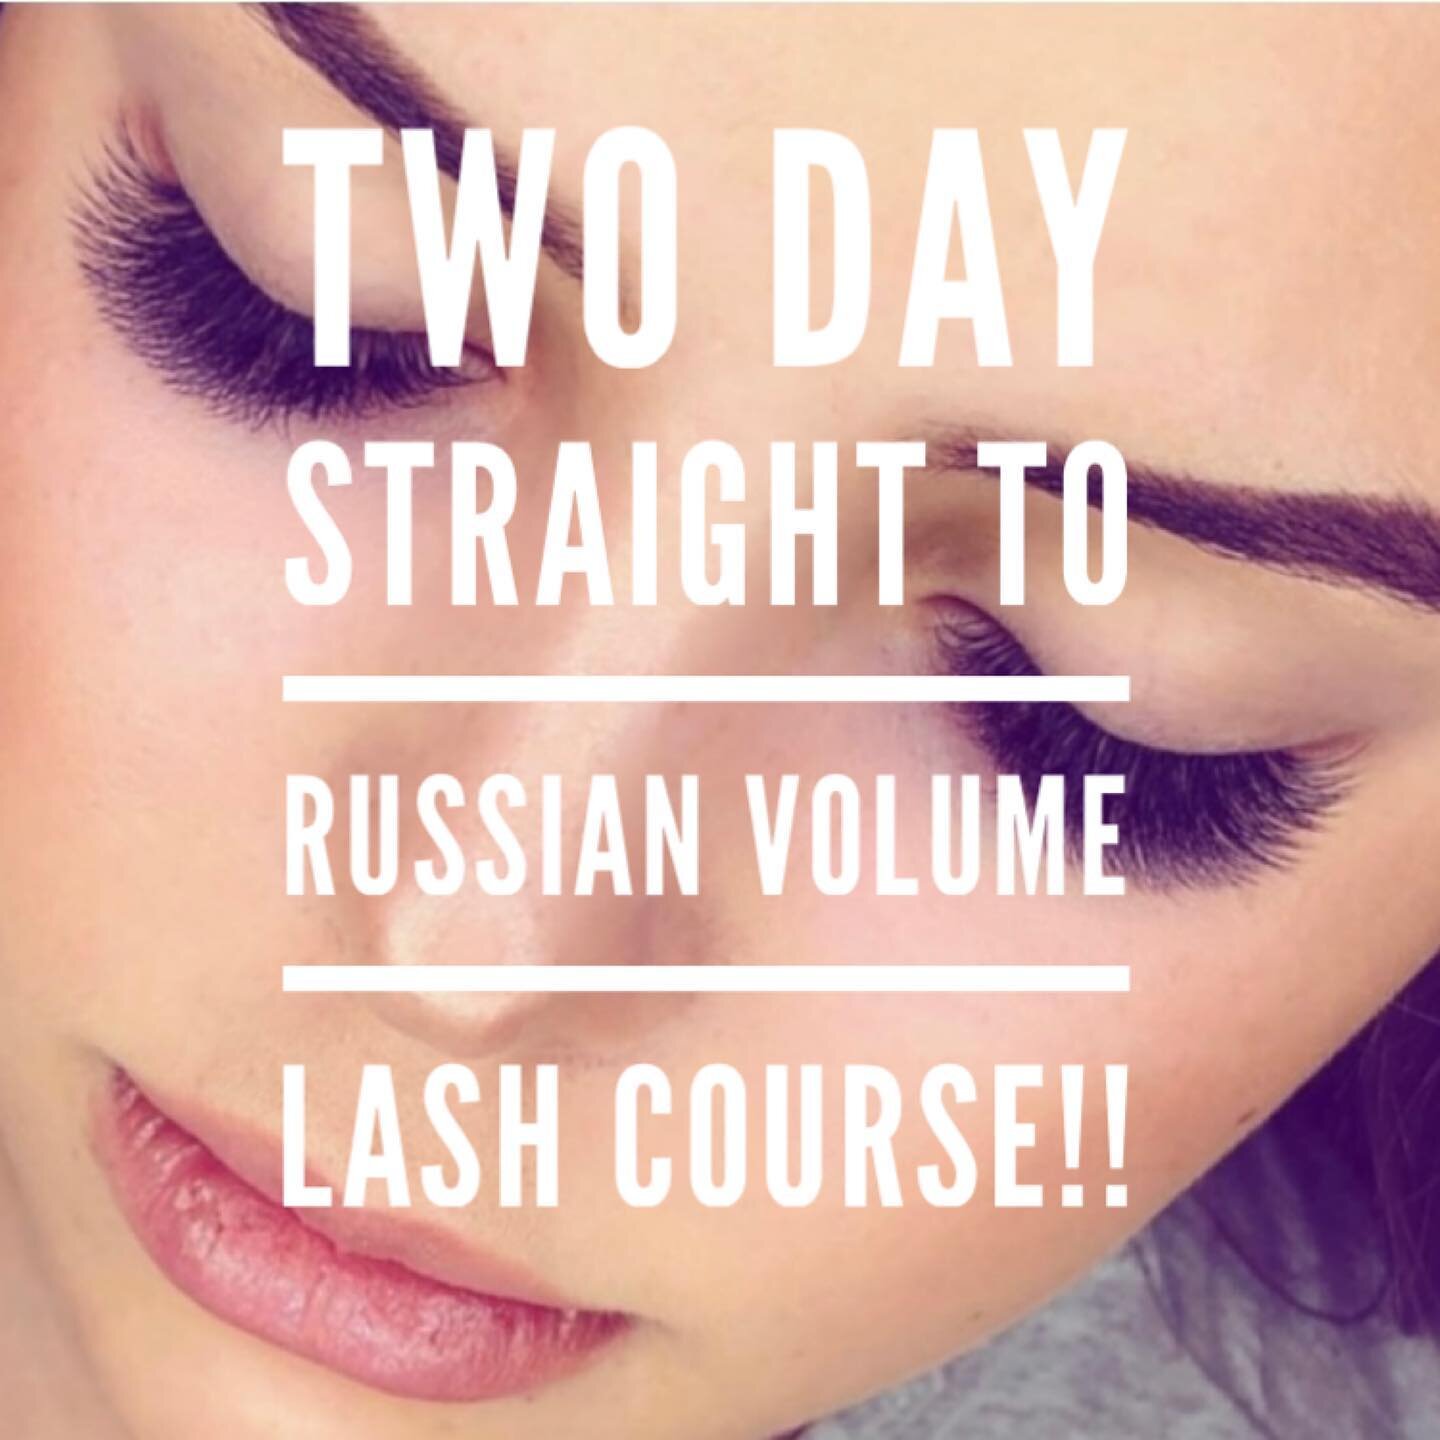 Thinking of a career change?
 My whole life changed for the better because of a lash course!!

Two day course starts Sunday 4thJuly!! Two spaces available!! Please message for details!! #newcareer #newlife #beyourownboss #lashtrainer #behappy #onelif